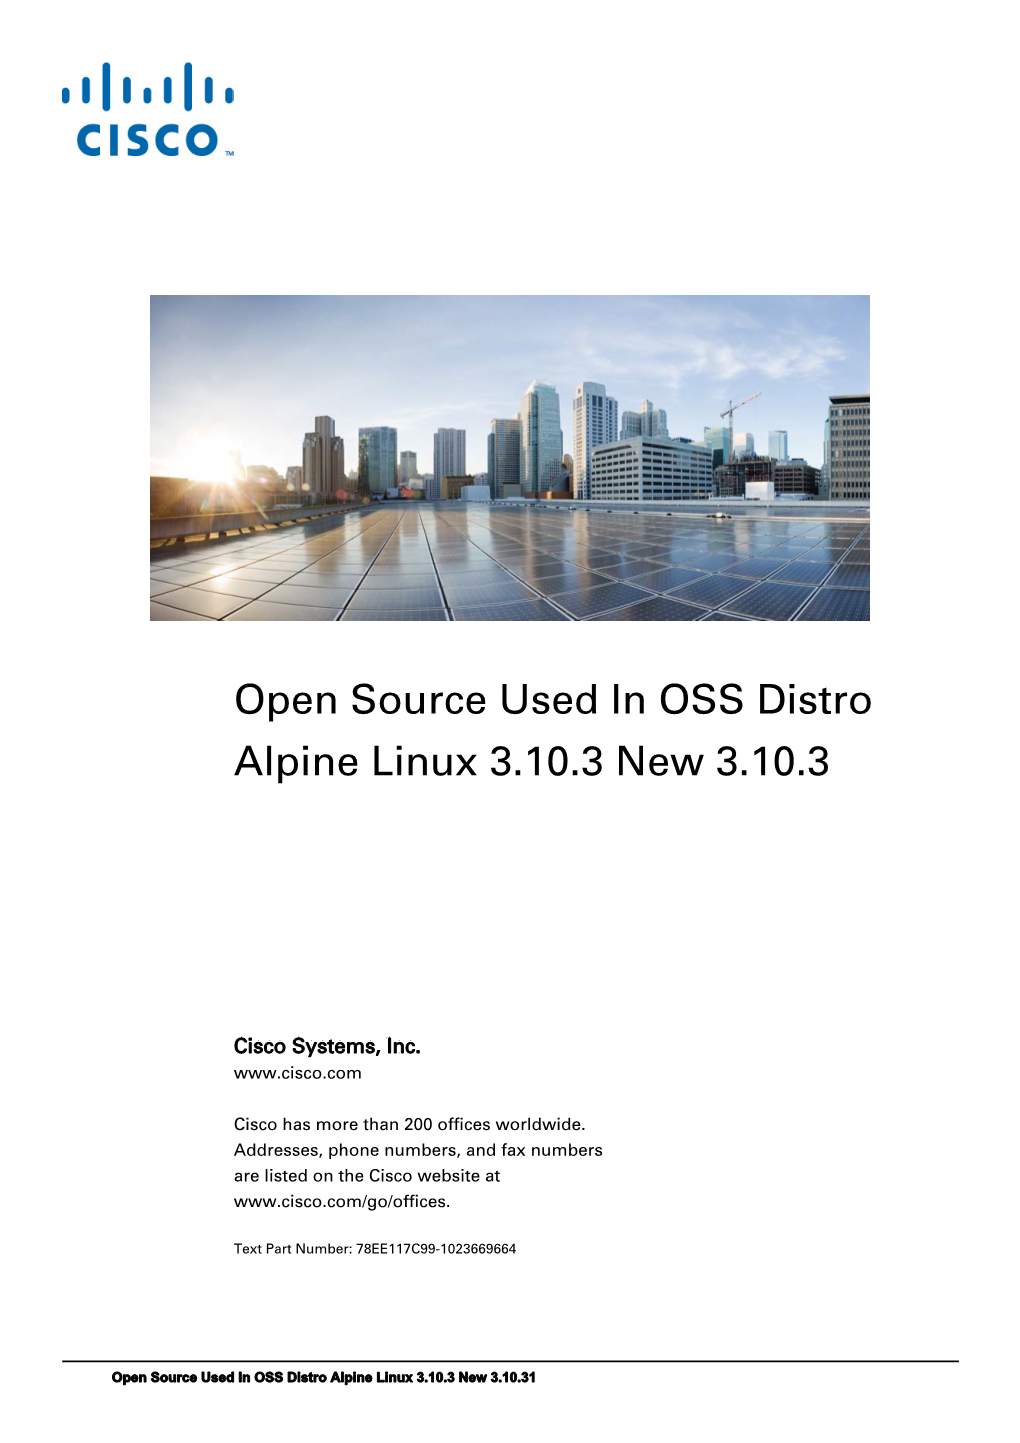 Open Source Used in OSS Distro Alpine Linux 3.10.3 New 3.10.3